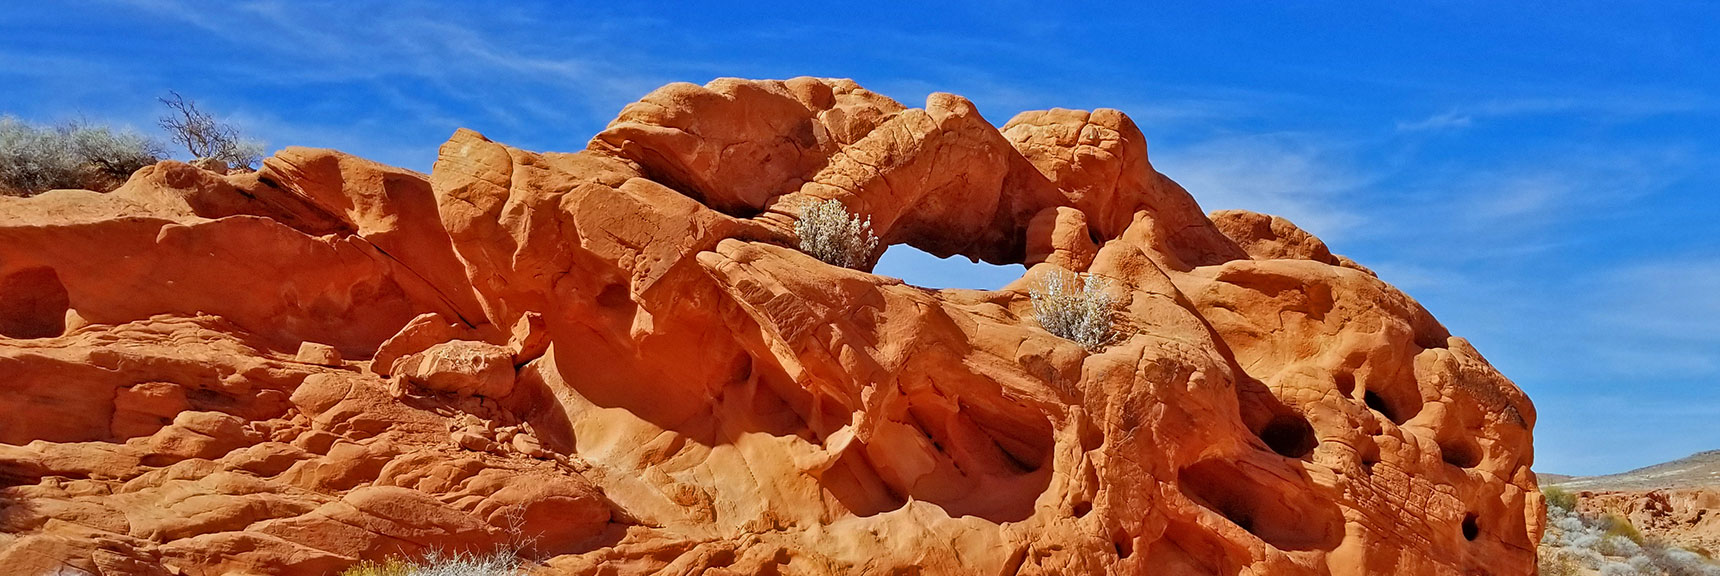 Natural Arch on Natural Arches Trail in Valley of Fire State Park, Nevada